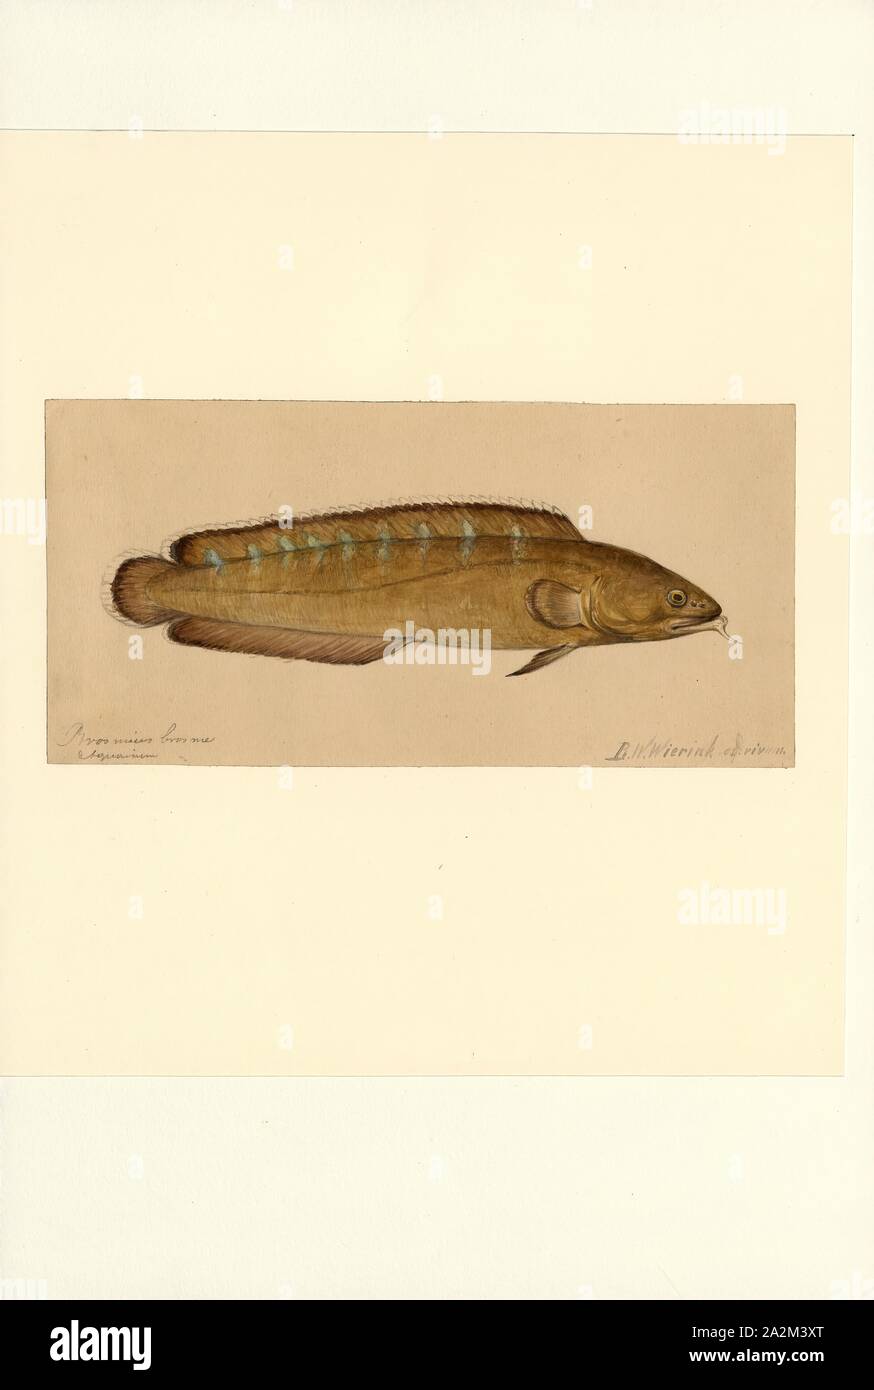 Brosmius brosme, Print, The cusk or tusk (Brosme brosme) is a North Atlantic cod-like fish in the ling family Lotidae. It is the only species in the genus Brosme. Other common names include brismak, brosmius, torsk and moonfish., 1856-1939 Stock Photo